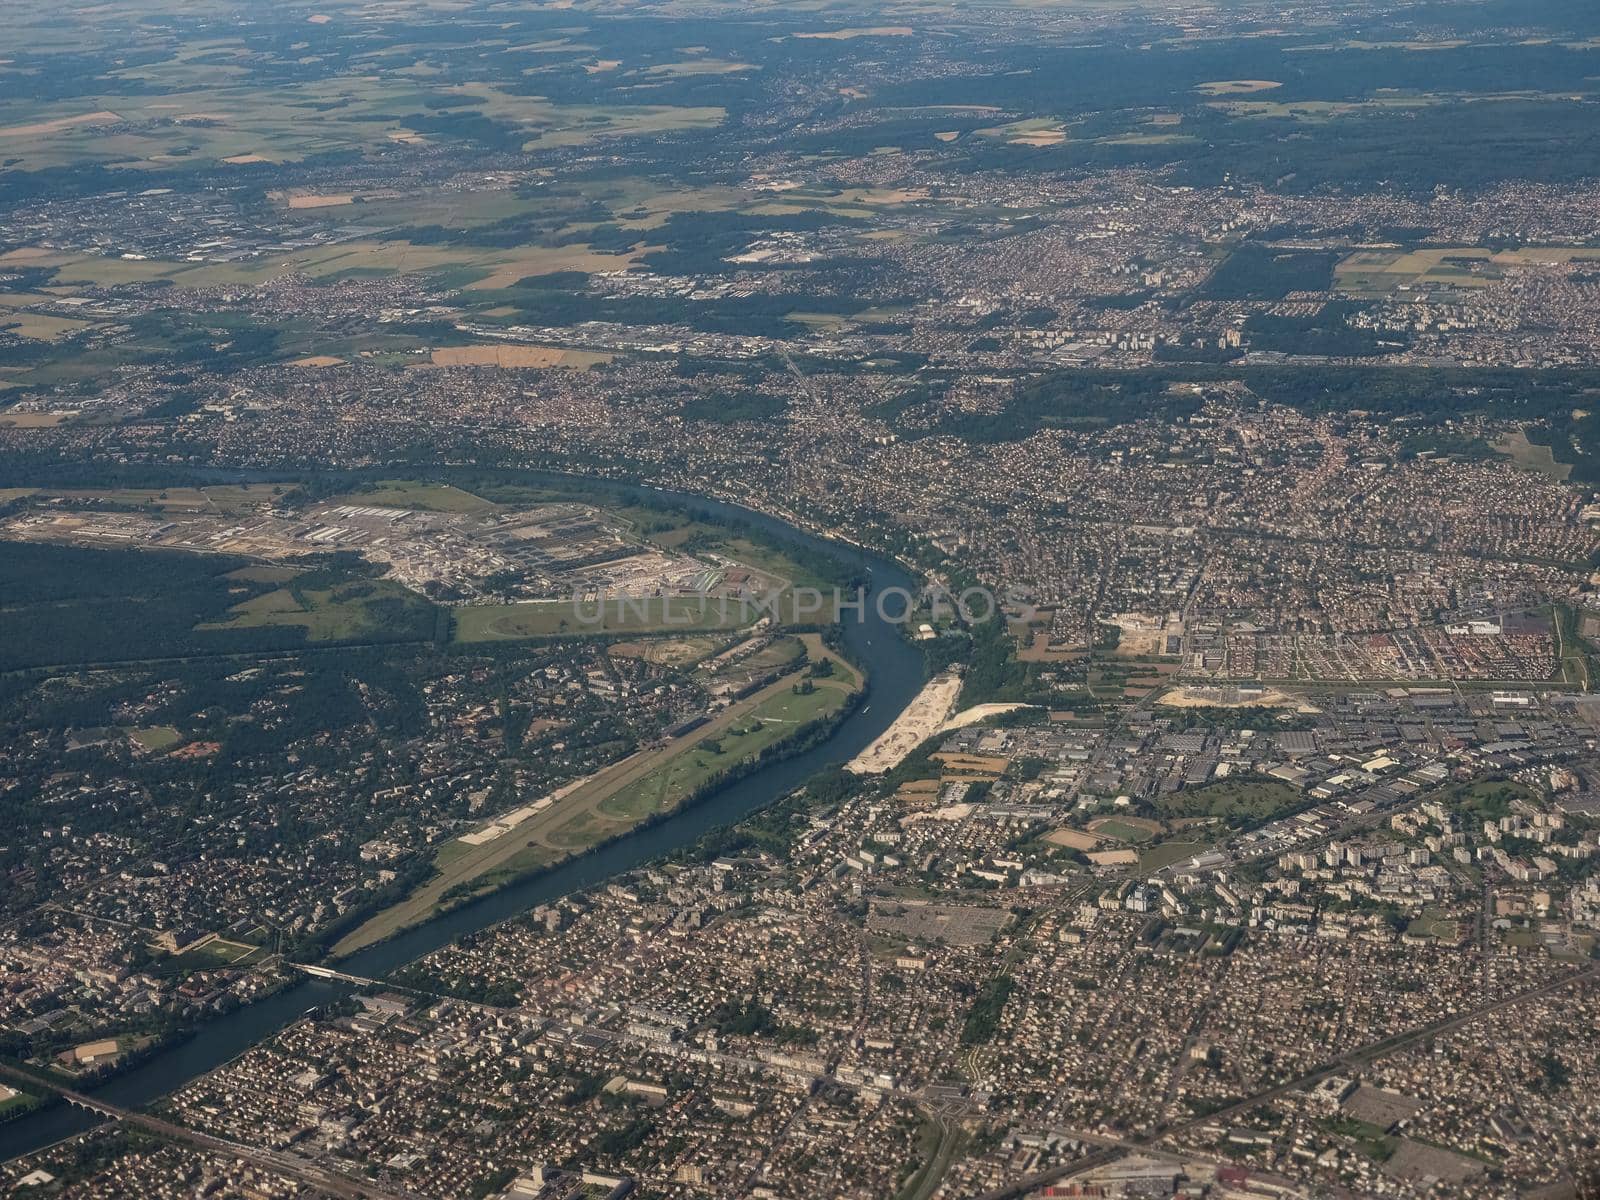 Aerial view of the city of Paris, France